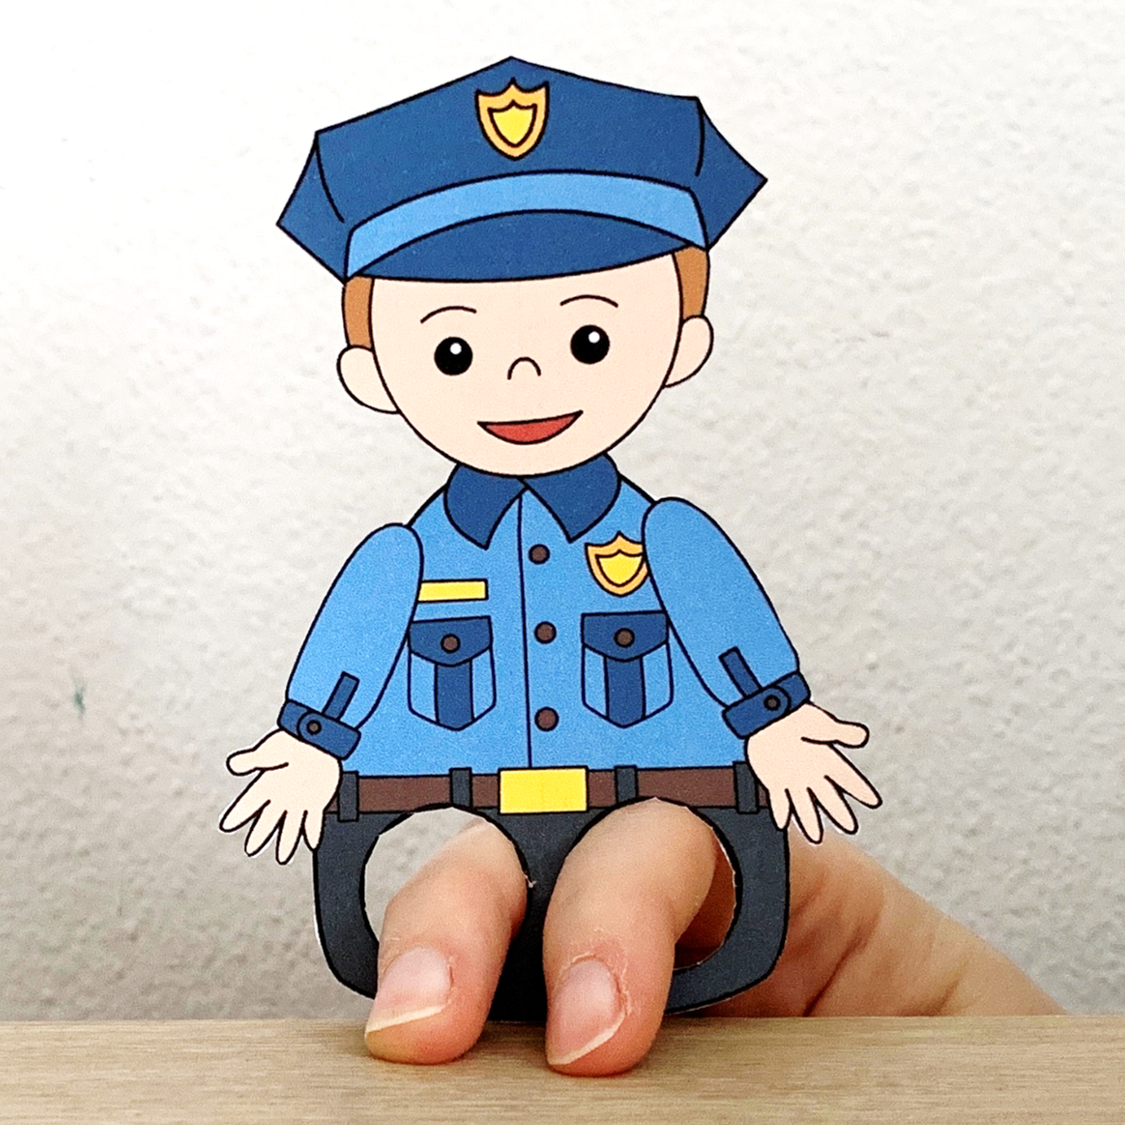 Police officer finger puppet printable career day coloring paper craft activity made by teachers